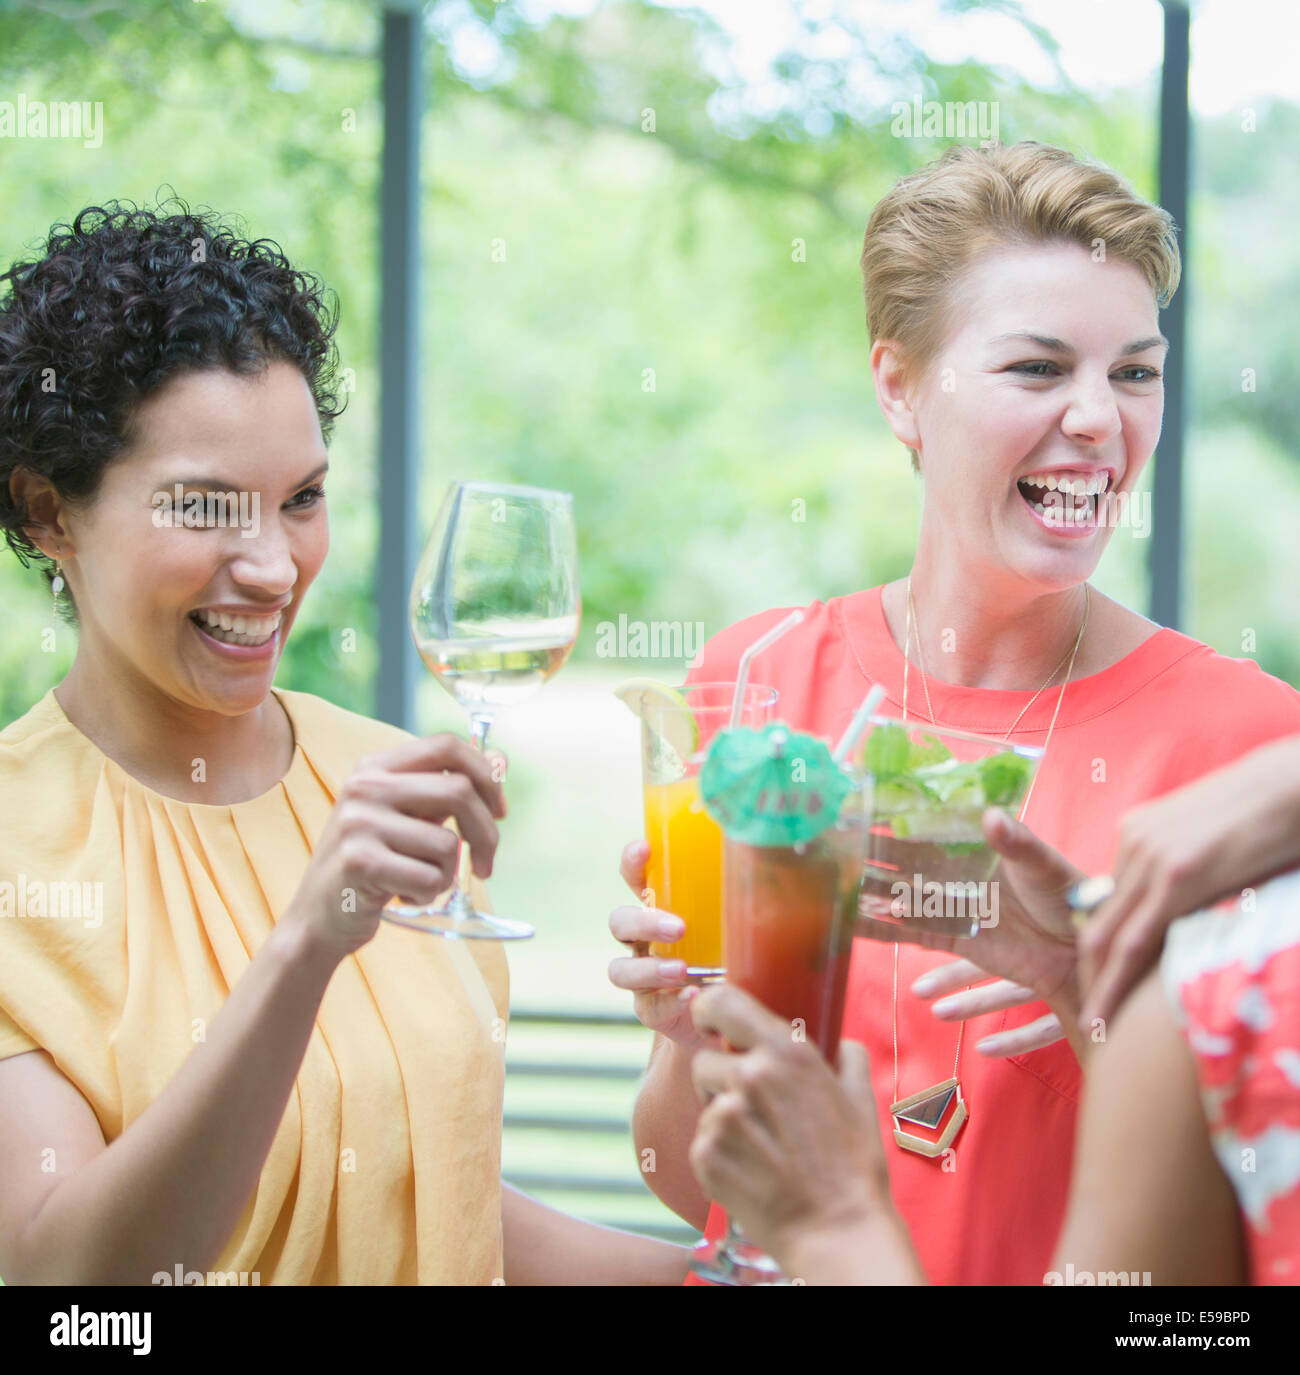 Women toasting each other at party Banque D'Images